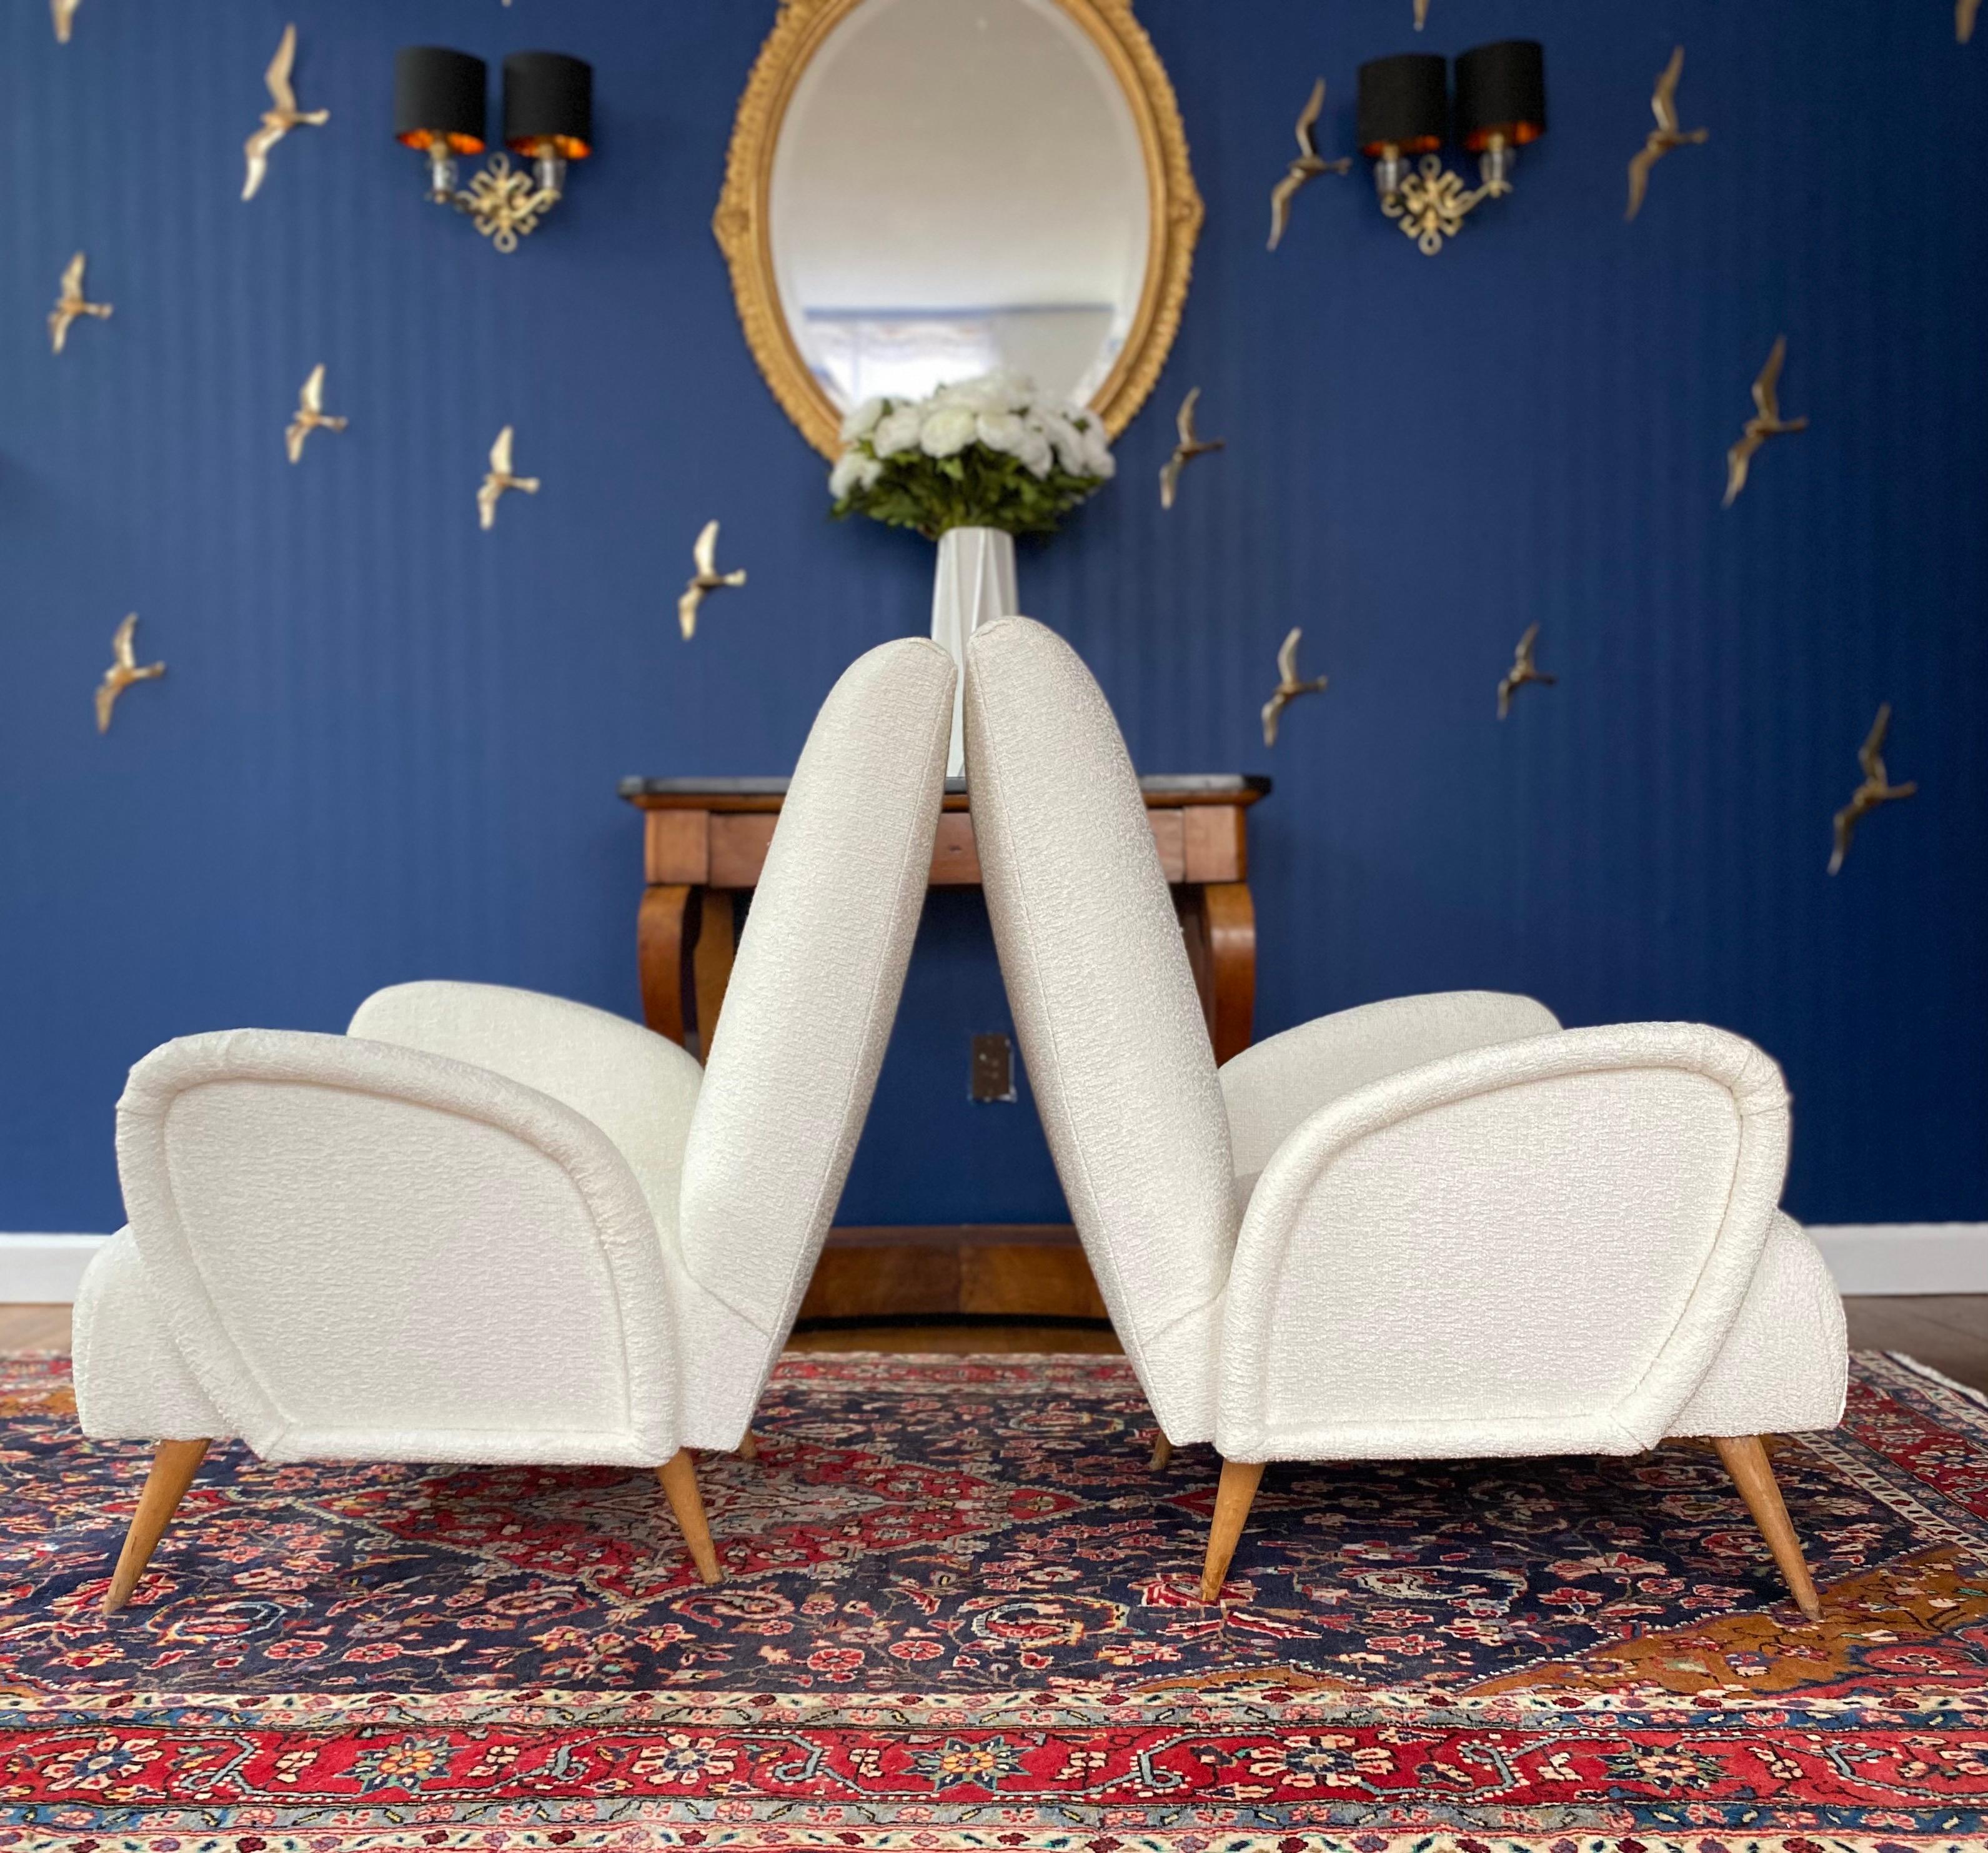 Pair of Italian midcentury armchairs Gio Ponti style club chairs in ivory bouclette.
These classic and exquisite armchairs have been fully restored and newly reupholstered in a luxurious fabric by Casamance.

